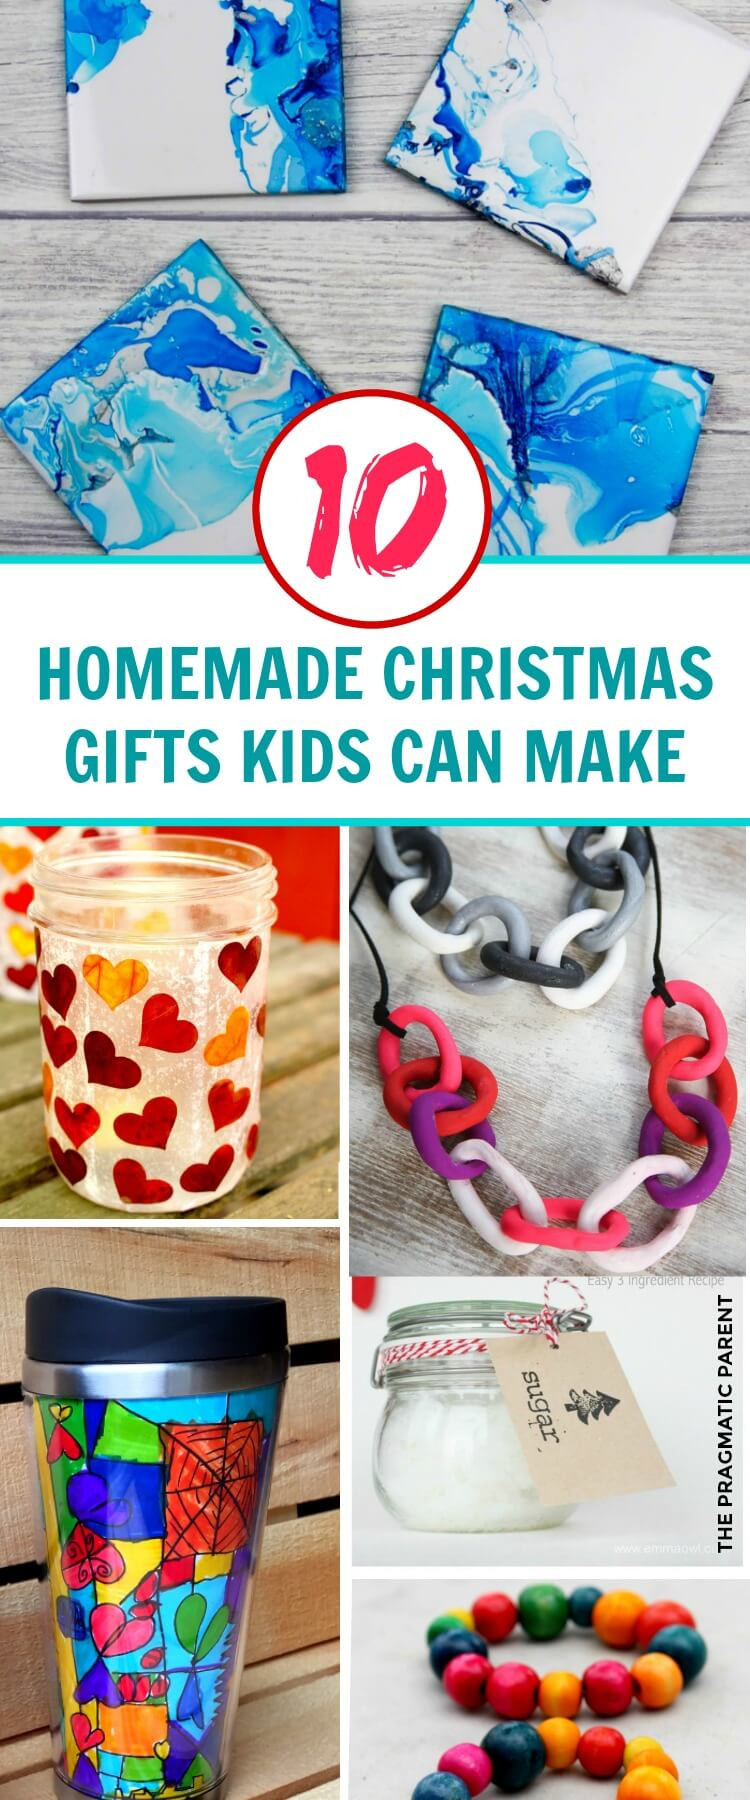 Holiday Gifts For Kids
 10 Beautiful Homemade Christmas Gifts Kids Can Make